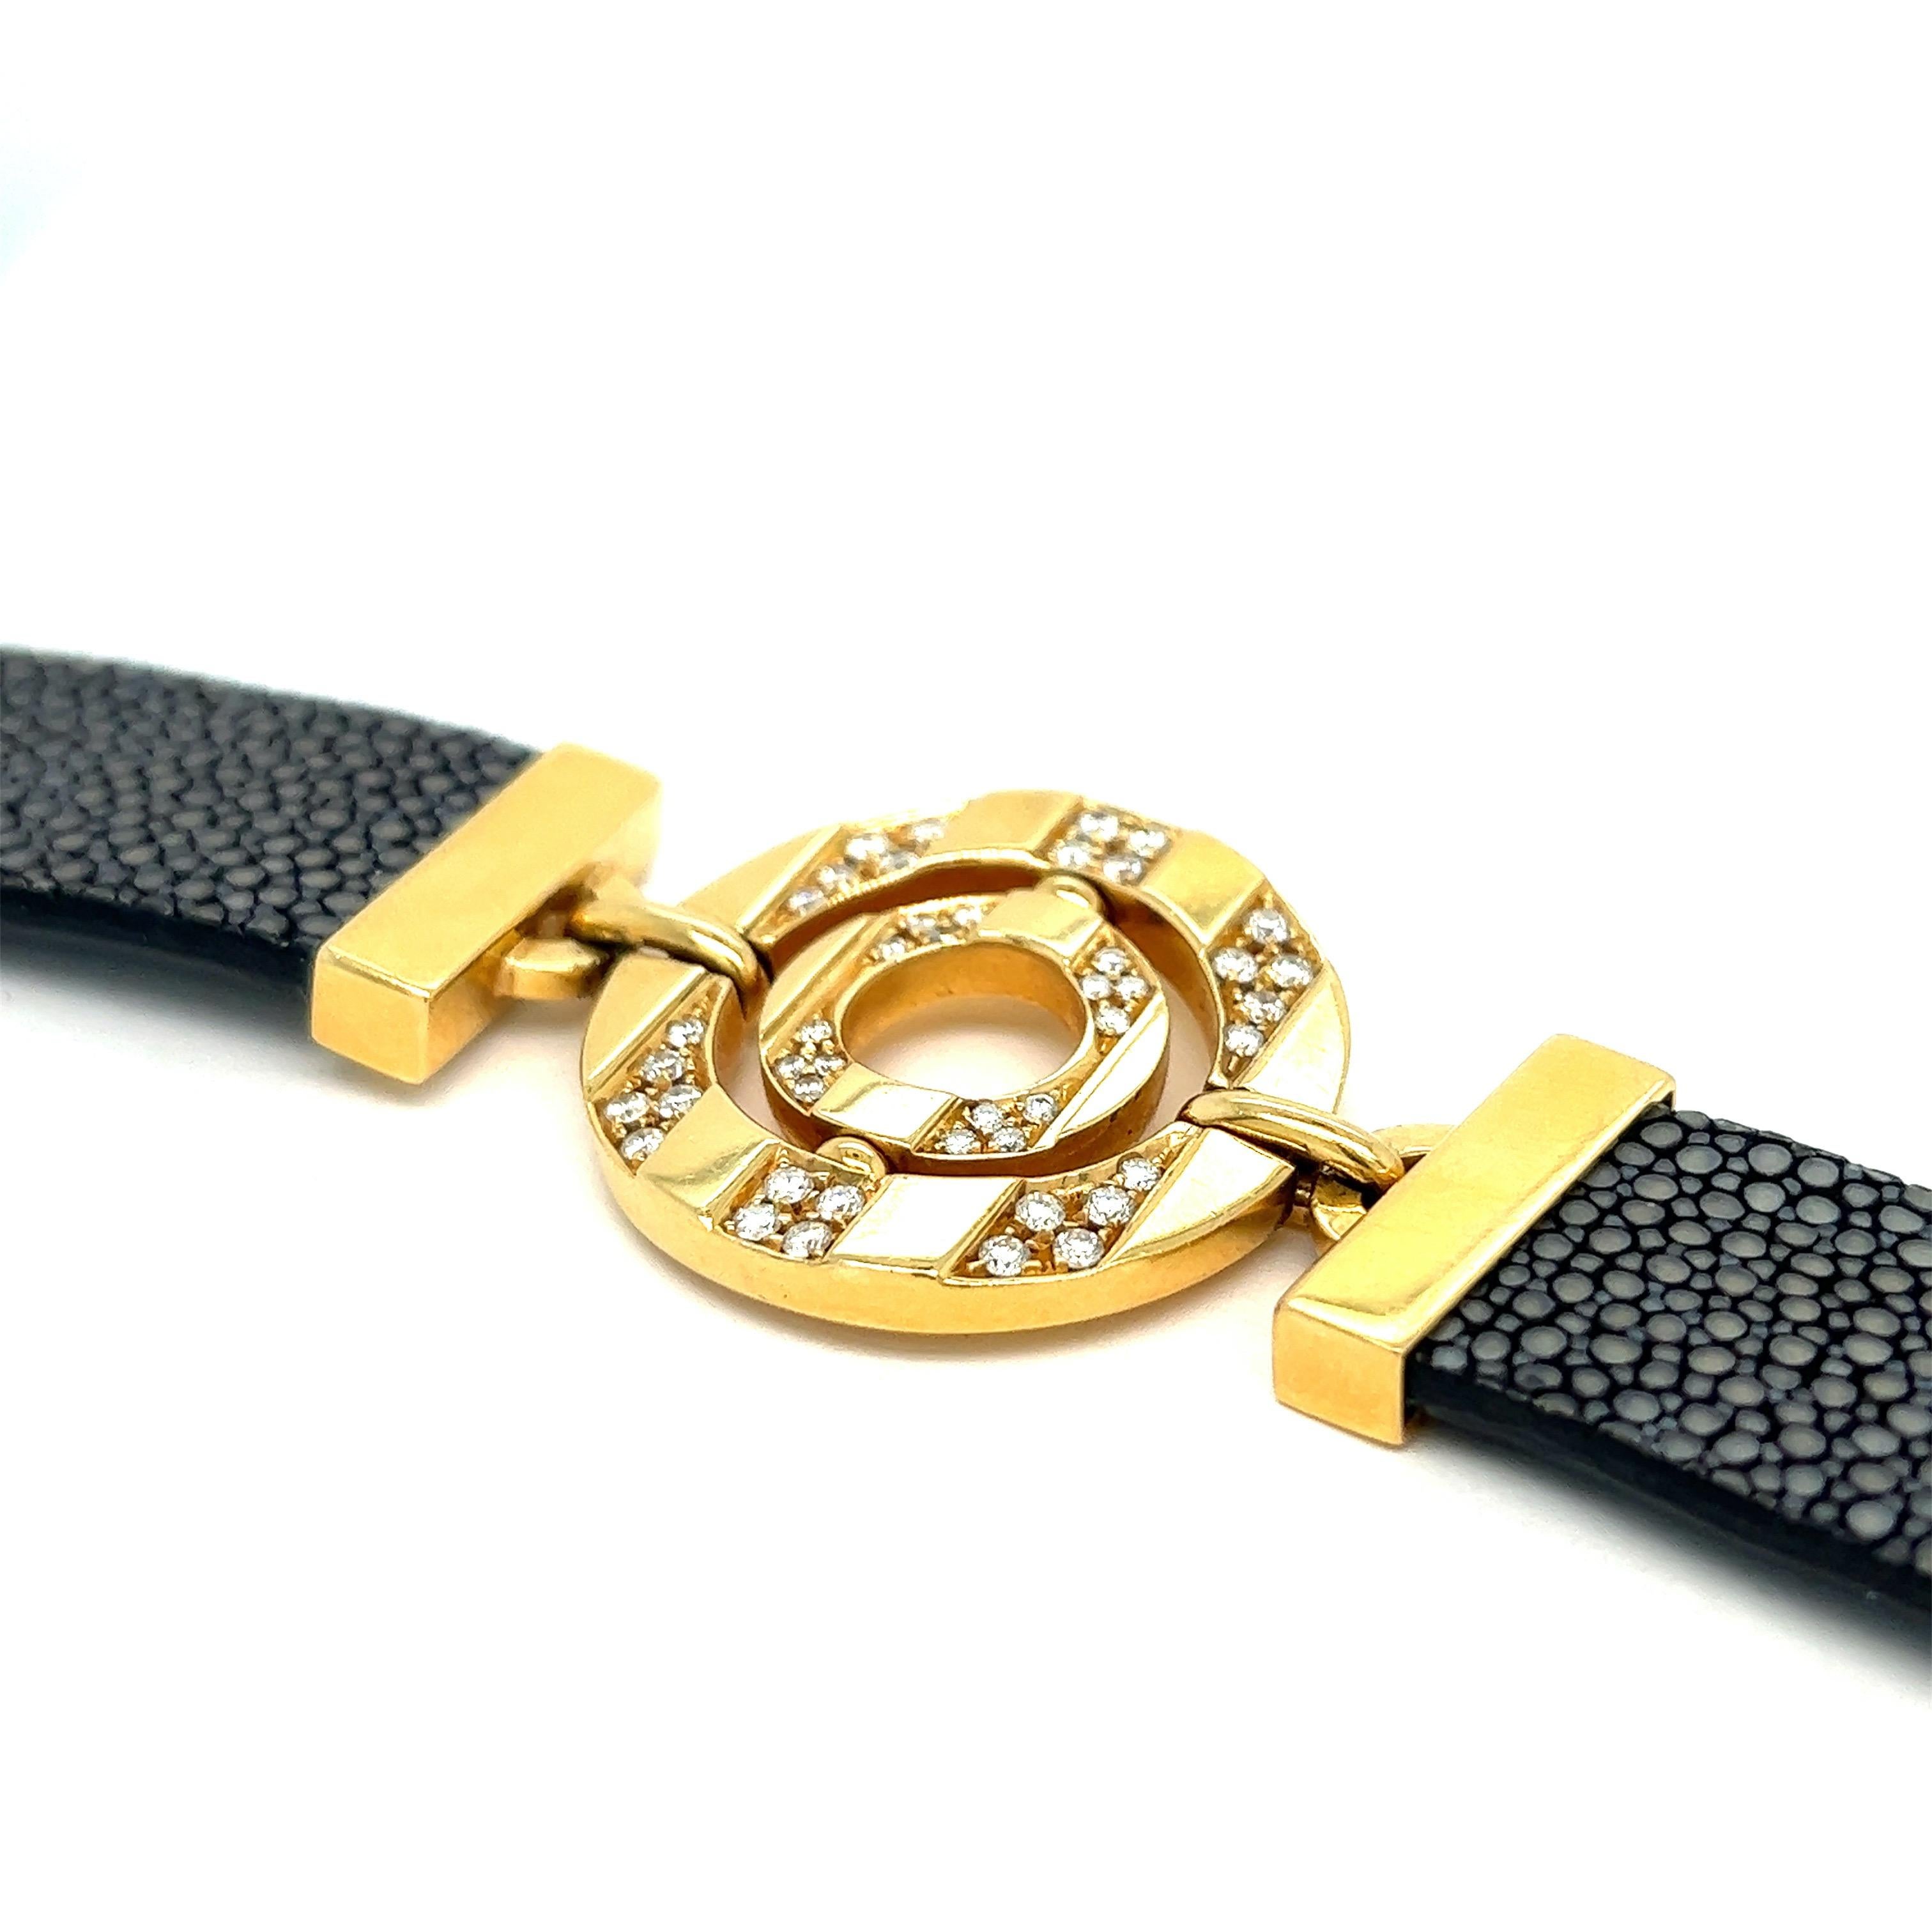 Bvlgari gold diamond leather bracelet

Round-cut diamonds, black leather straps, 18 karat yellow gold; marked Bvlgari, Made in Italy, 750

Size: width 1.13 inches, length 8.25 inches
Total weight: 48.2 grams 